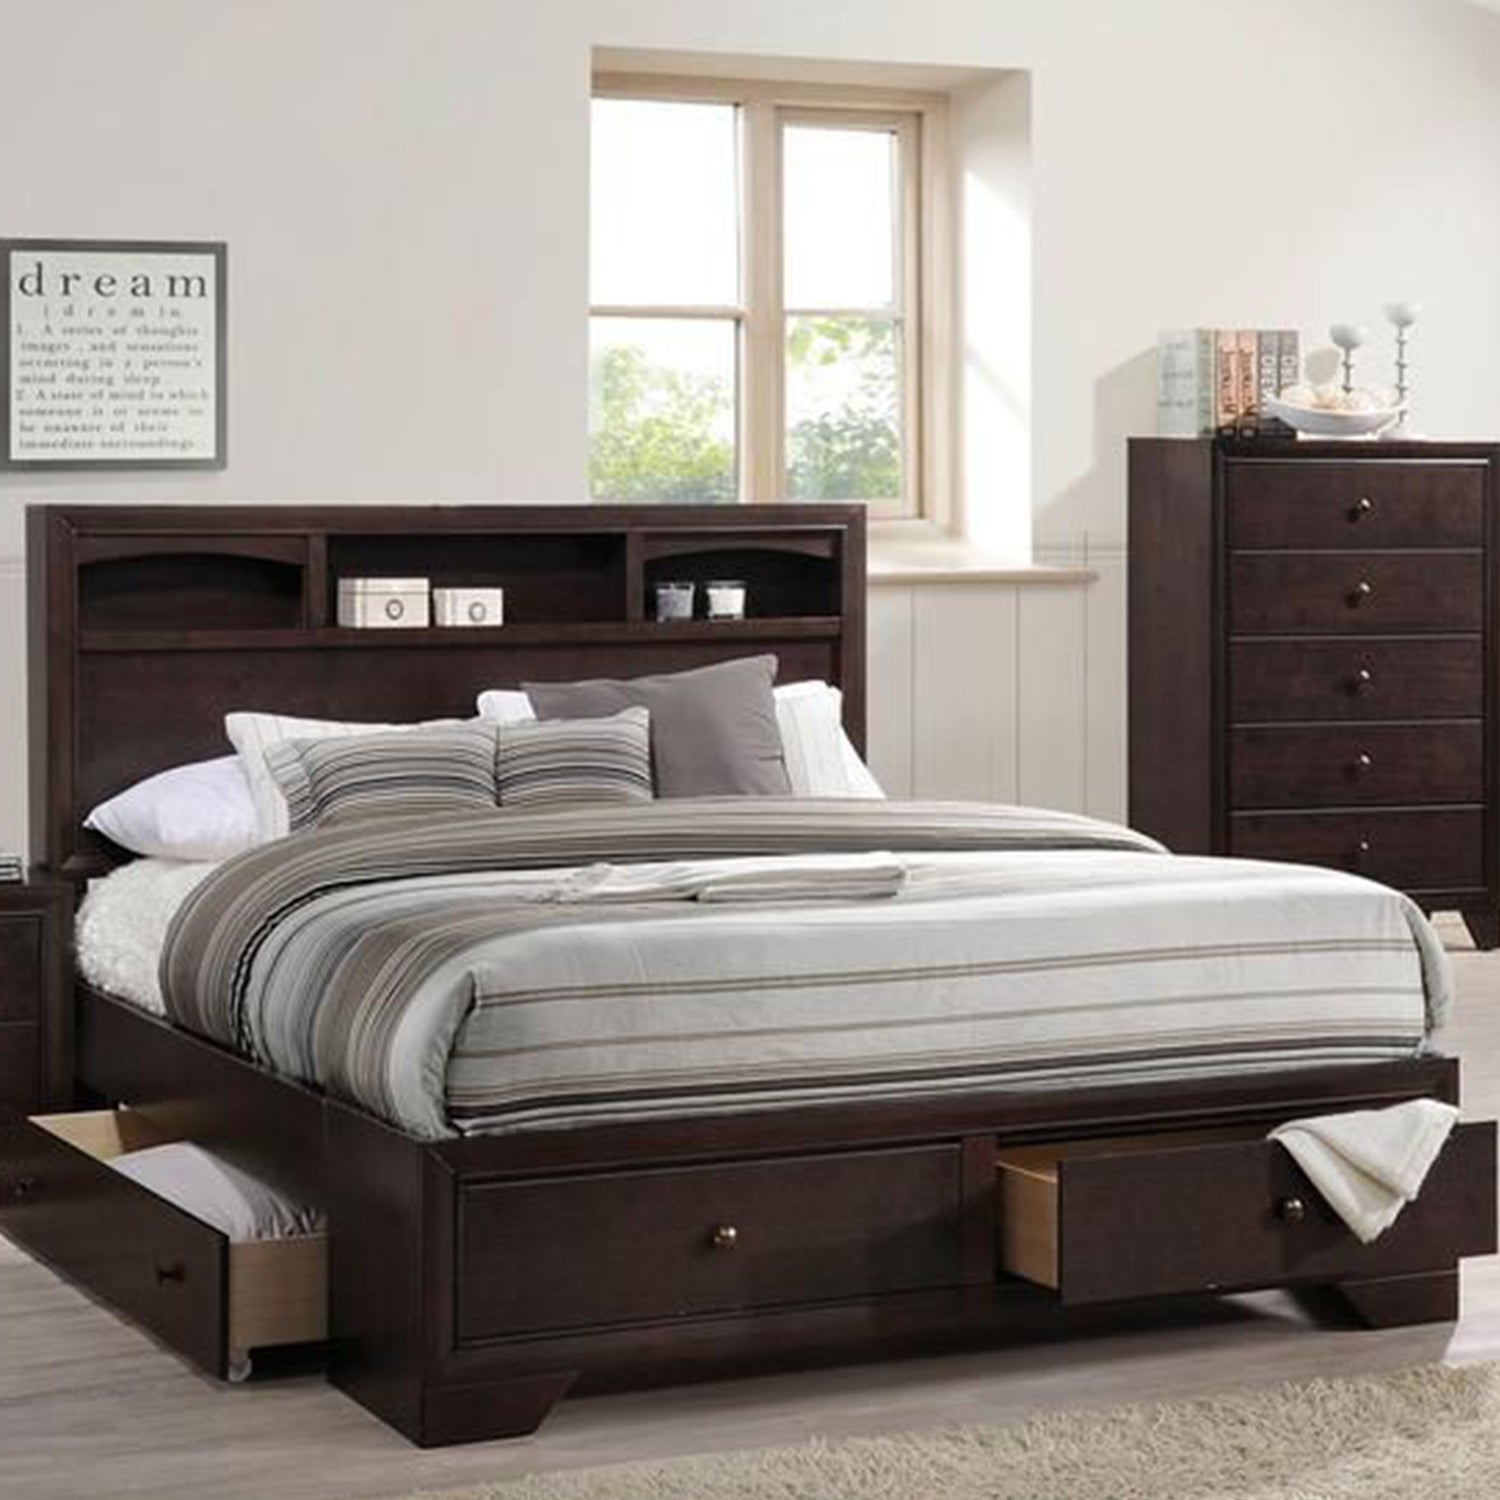 Rich Espresso Finish King Bed With Storage